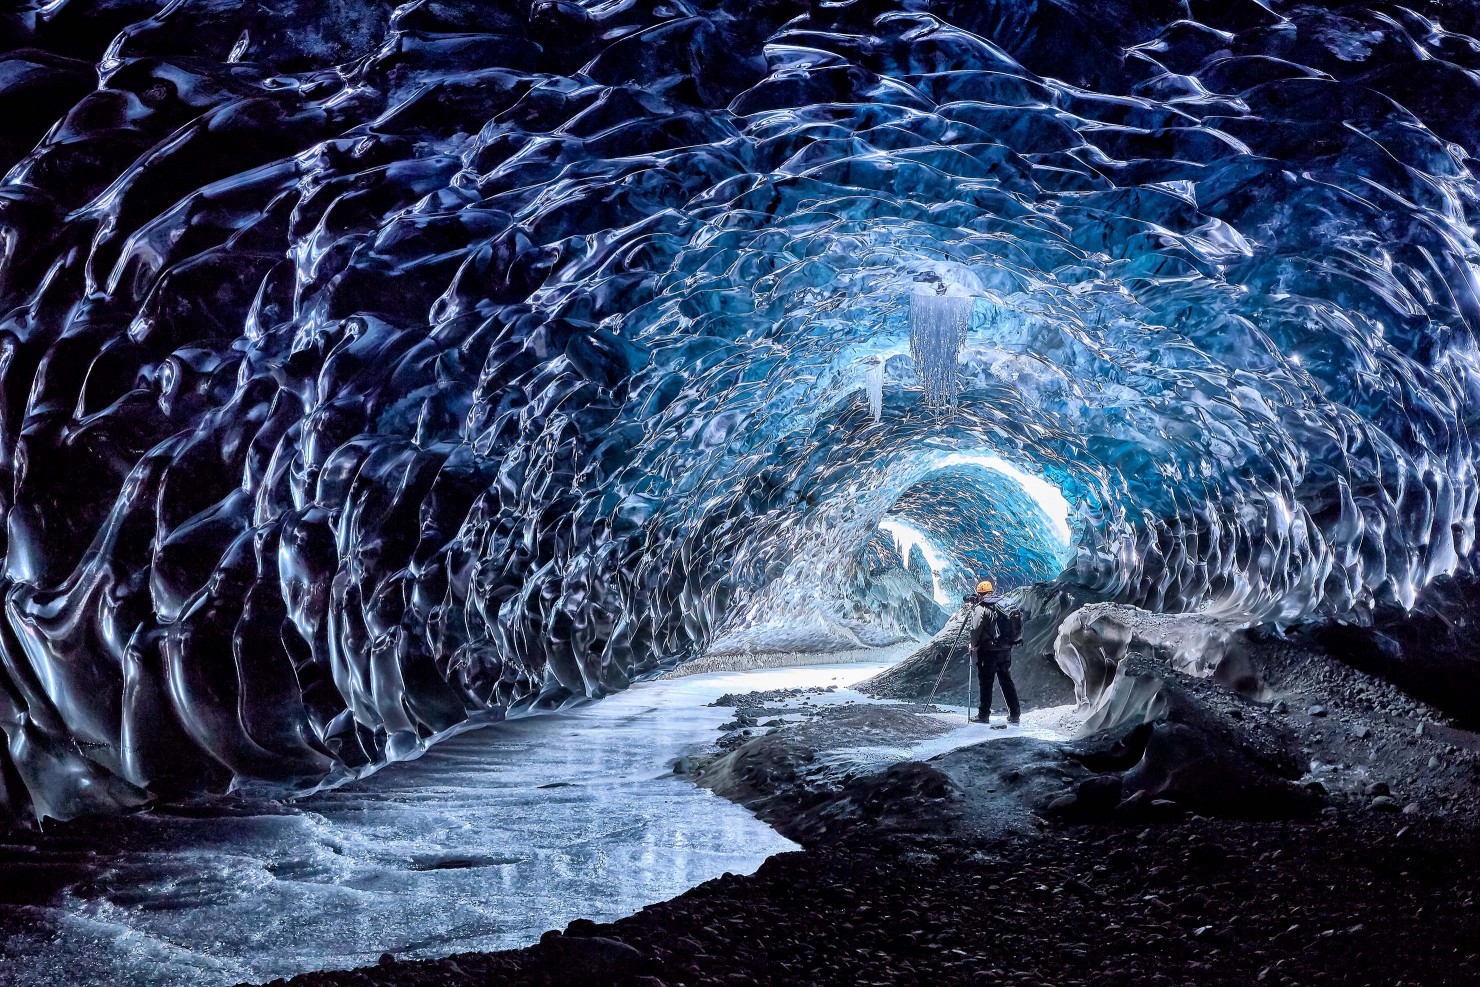 Travel Destination Commercial Photography Brands Adventure Resort Airline Paul Reiffer Photographer Professional Exclusive Luxury Ice Cave Iceland